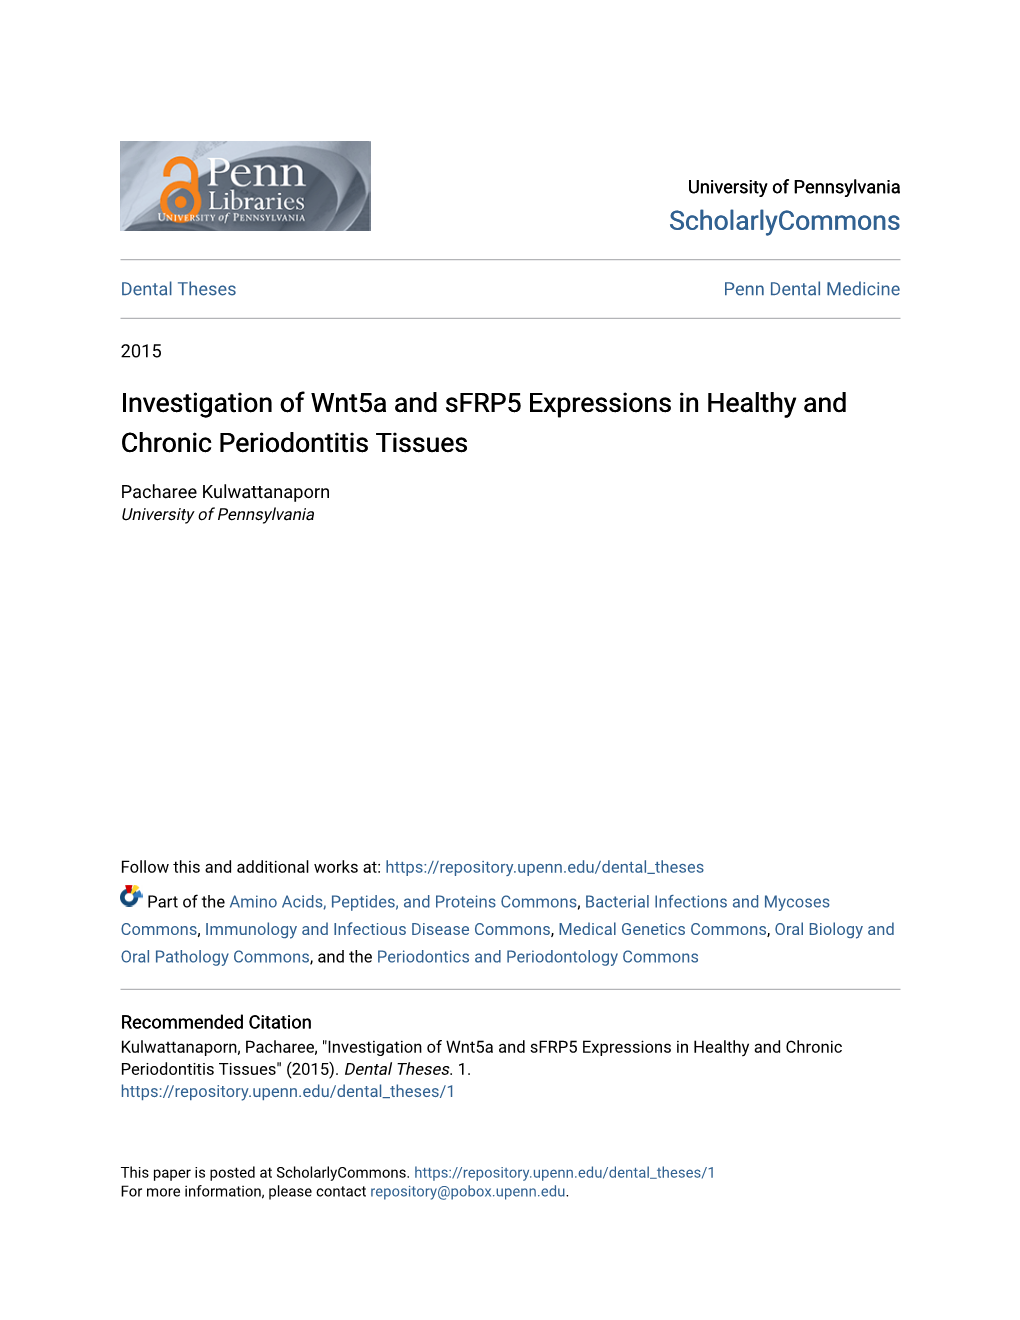 Investigation of Wnt5a and Sfrp5 Expressions in Healthy and Chronic Periodontitis Tissues